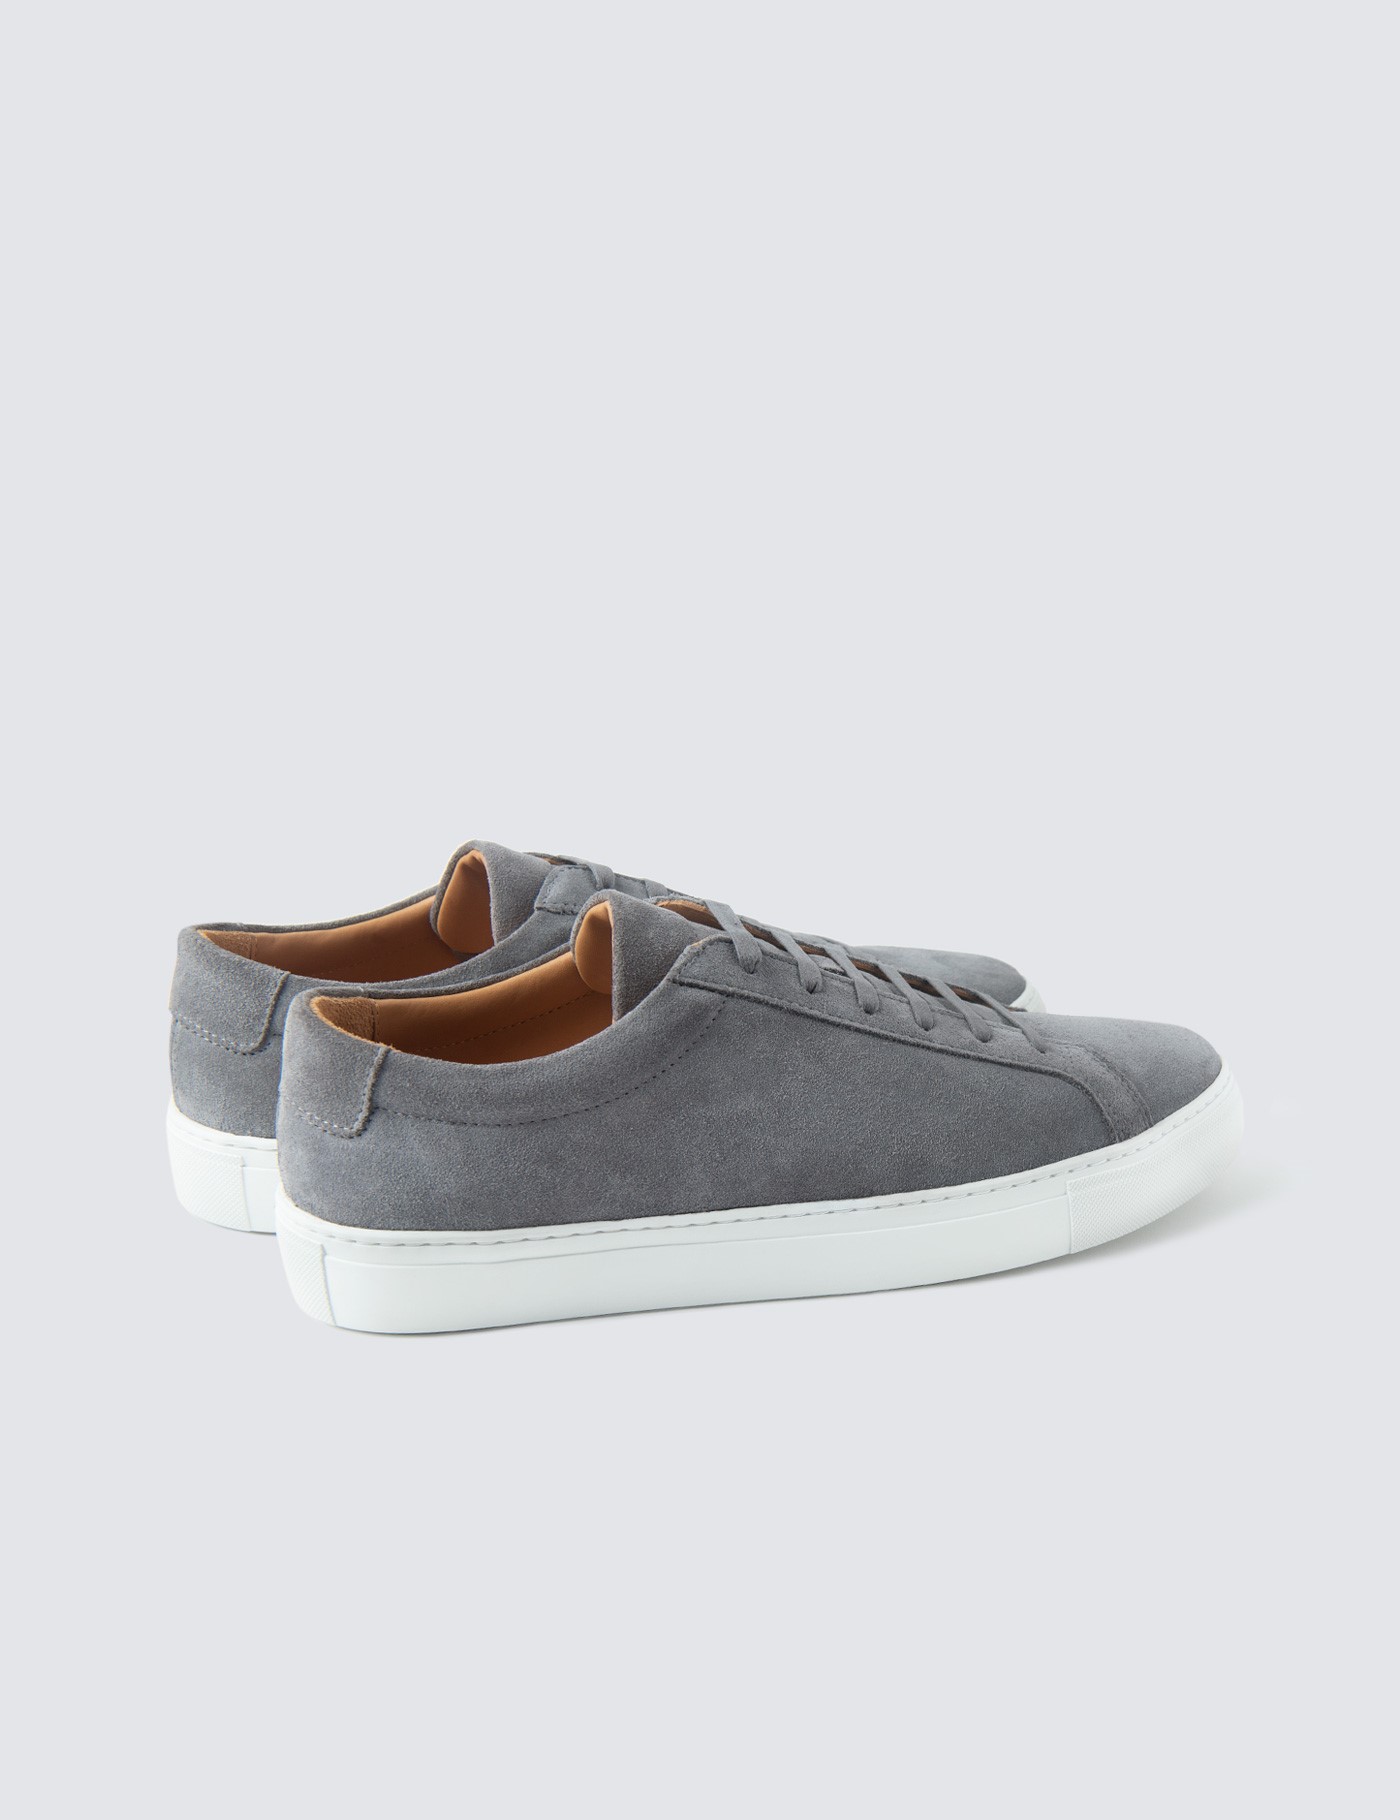 Suede & Leather Men's Trainers with Rubber outsole in Grey | Hawes ...